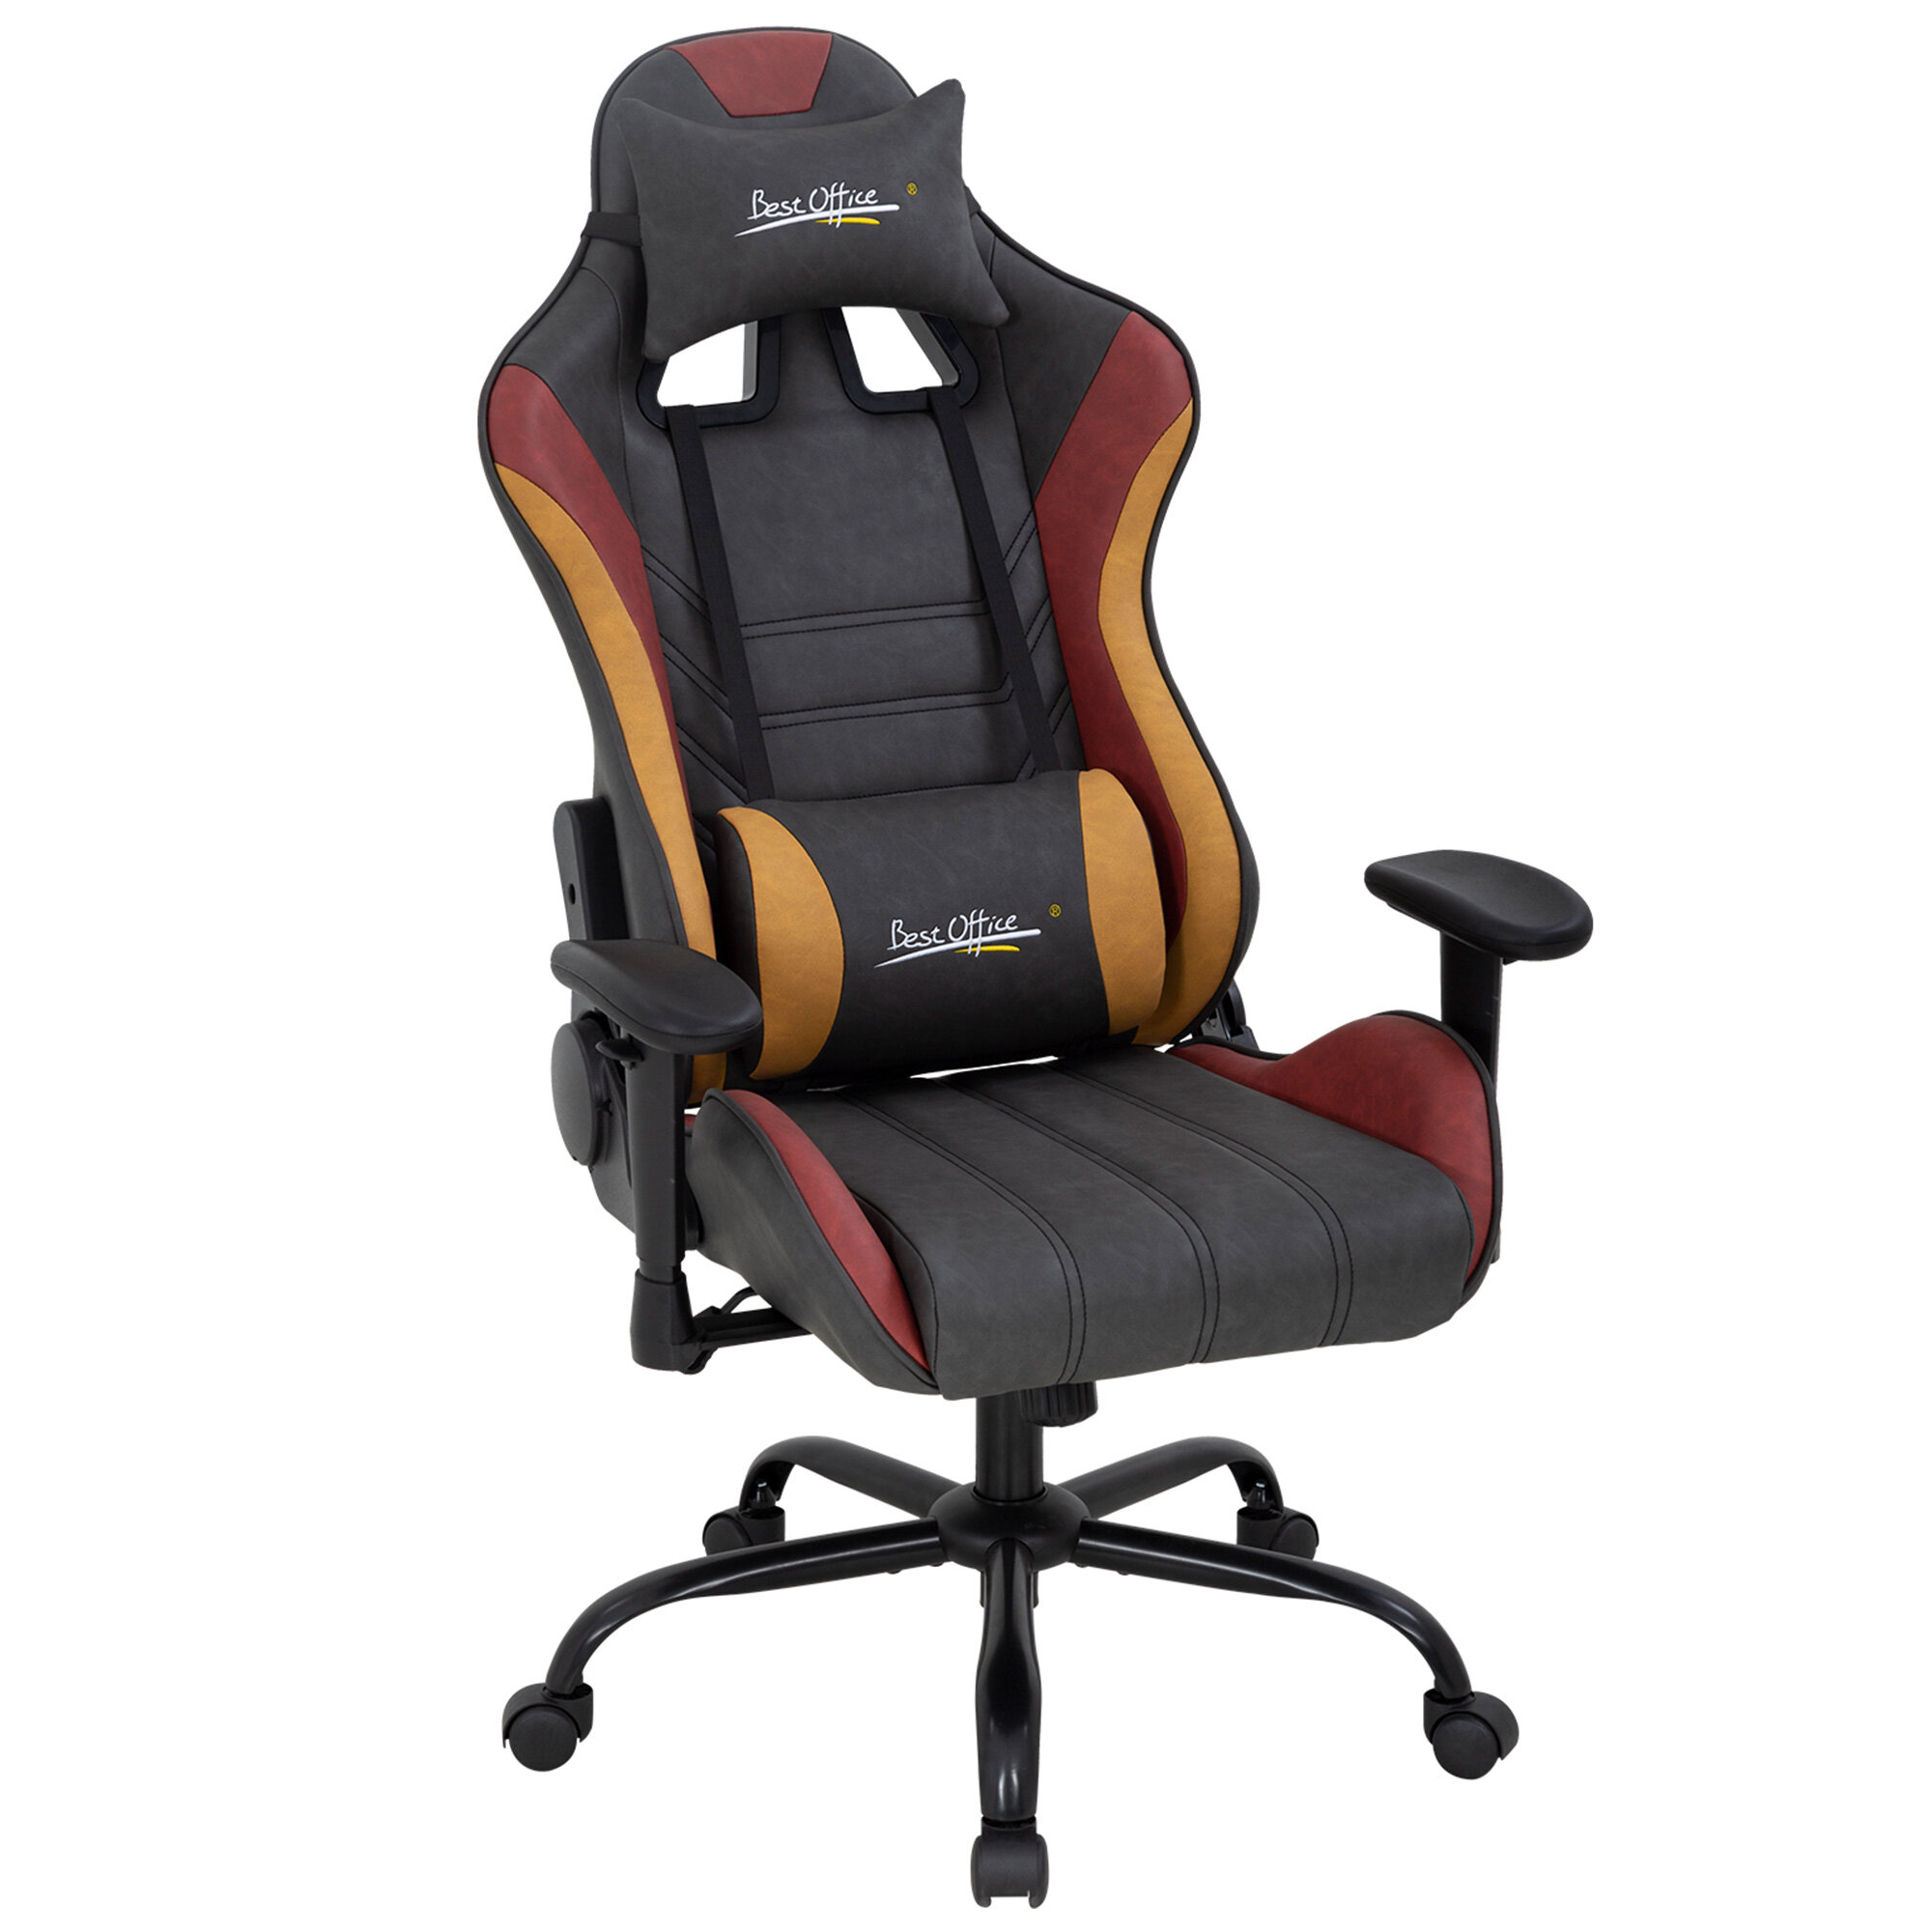 Details about   Gaming Chair Racing Office Home Lumbar Support Arms Headrest Ergonomic Swivel US 